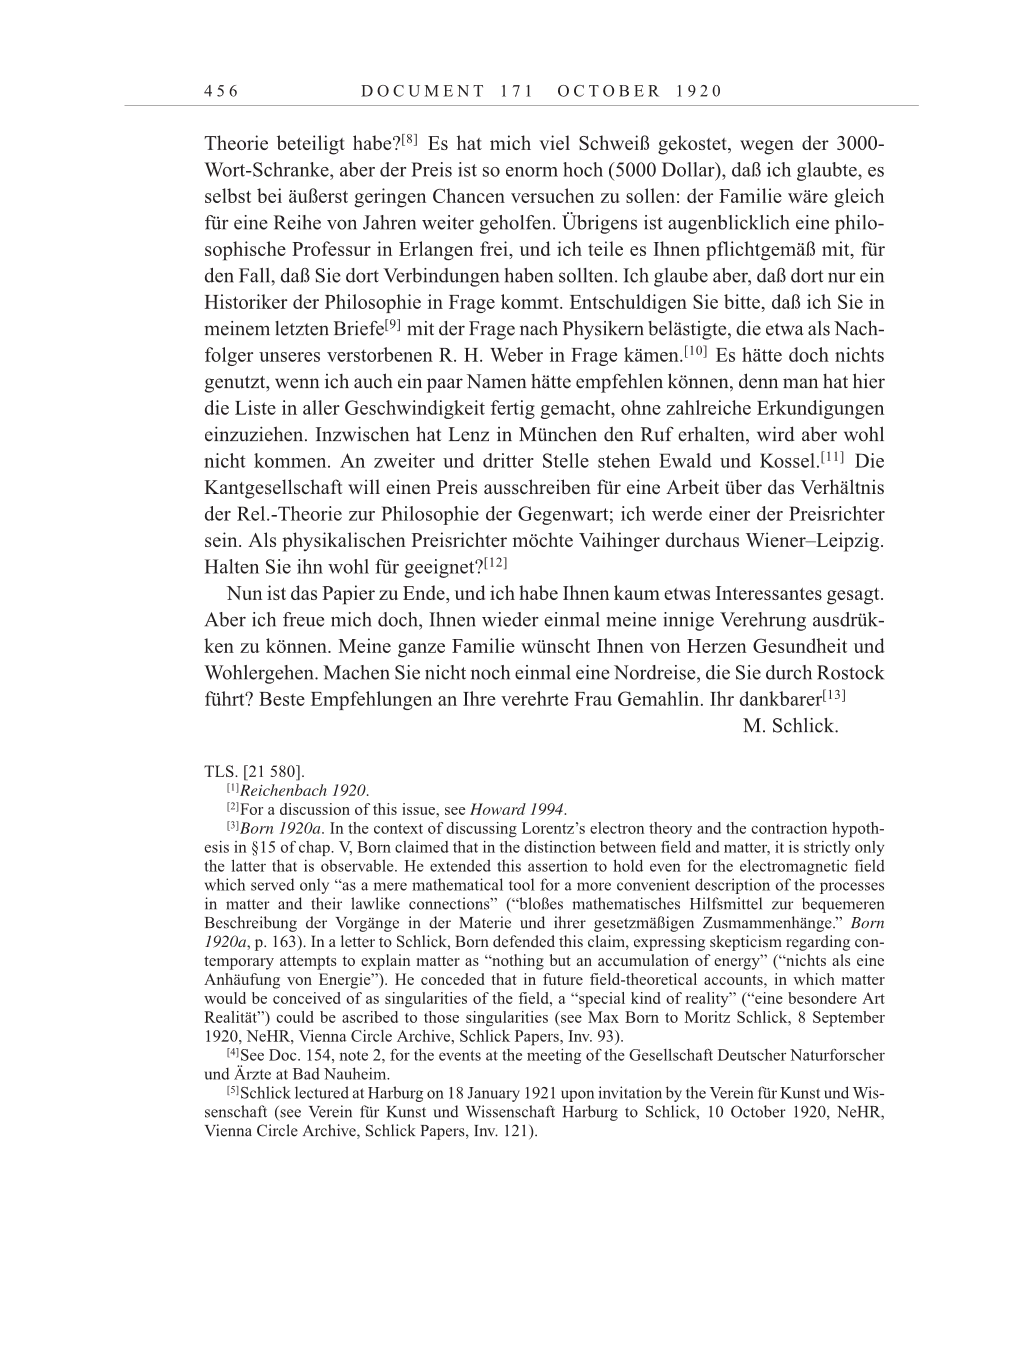 Volume 10: The Berlin Years: Correspondence May-December 1920 / Supplementary Correspondence 1909-1920 page 456